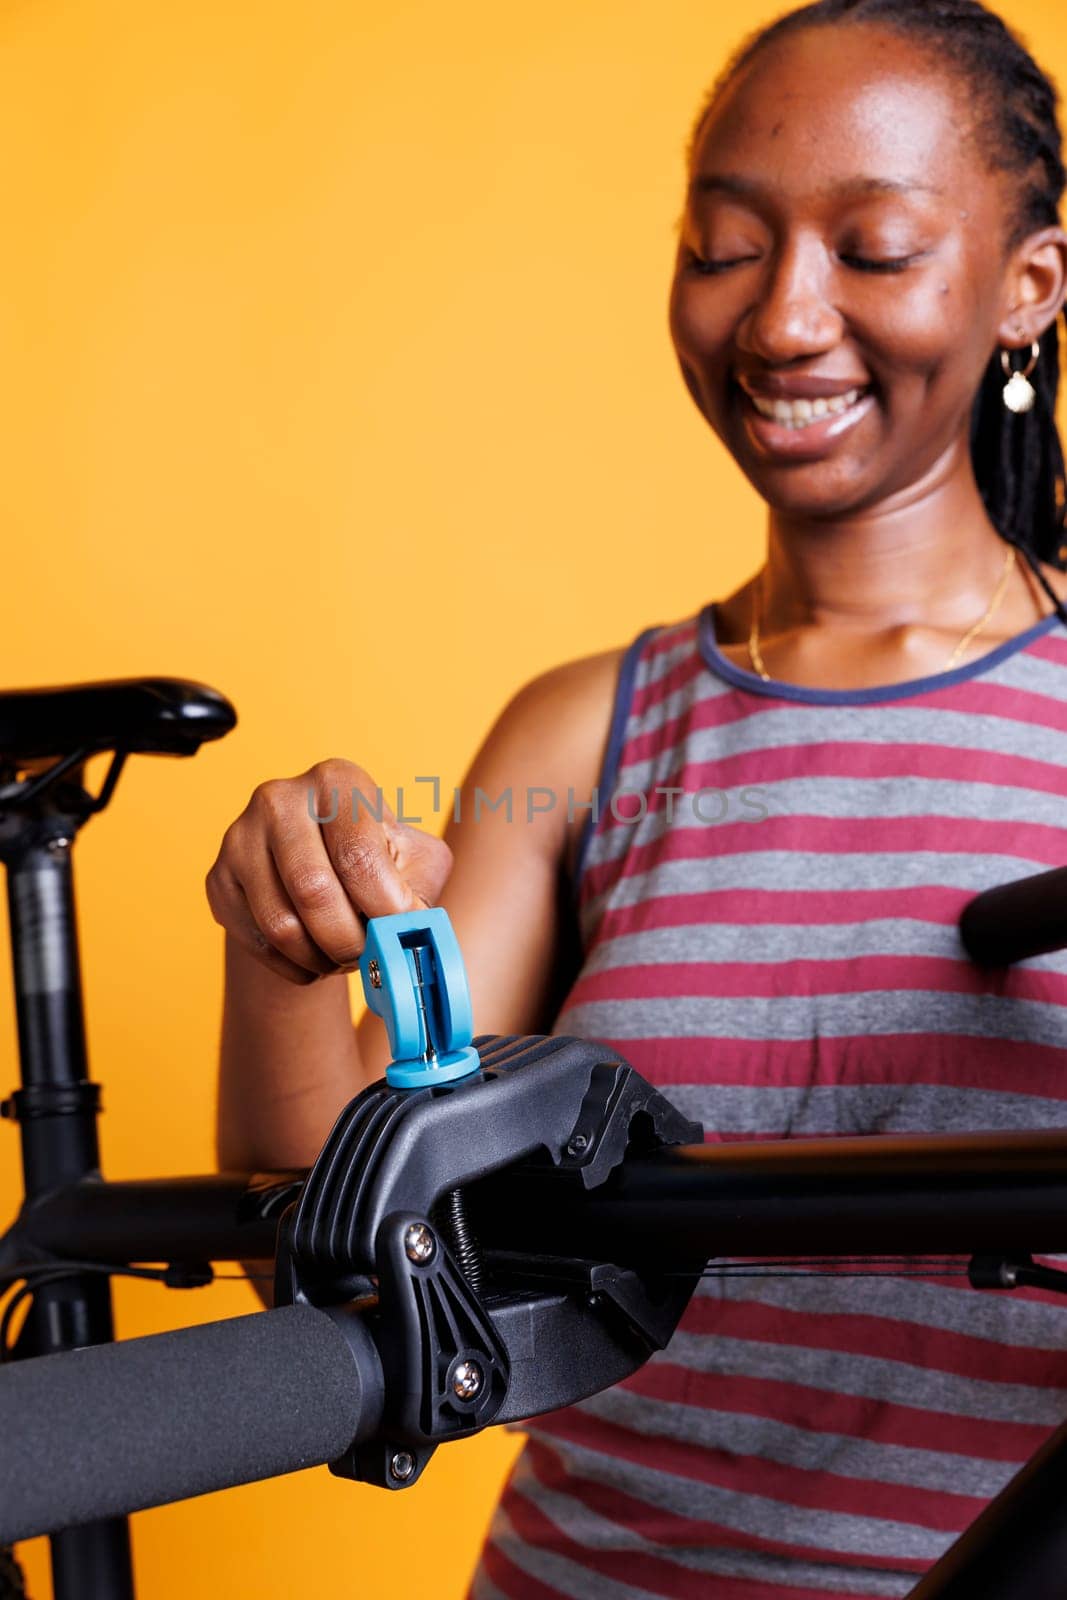 Detailed view of african american female examining, adjusting, and fixing bicycle to ensure safety. Image showing black woman gripping and fastening a broken bike onto a repair stand. Close-up shot.